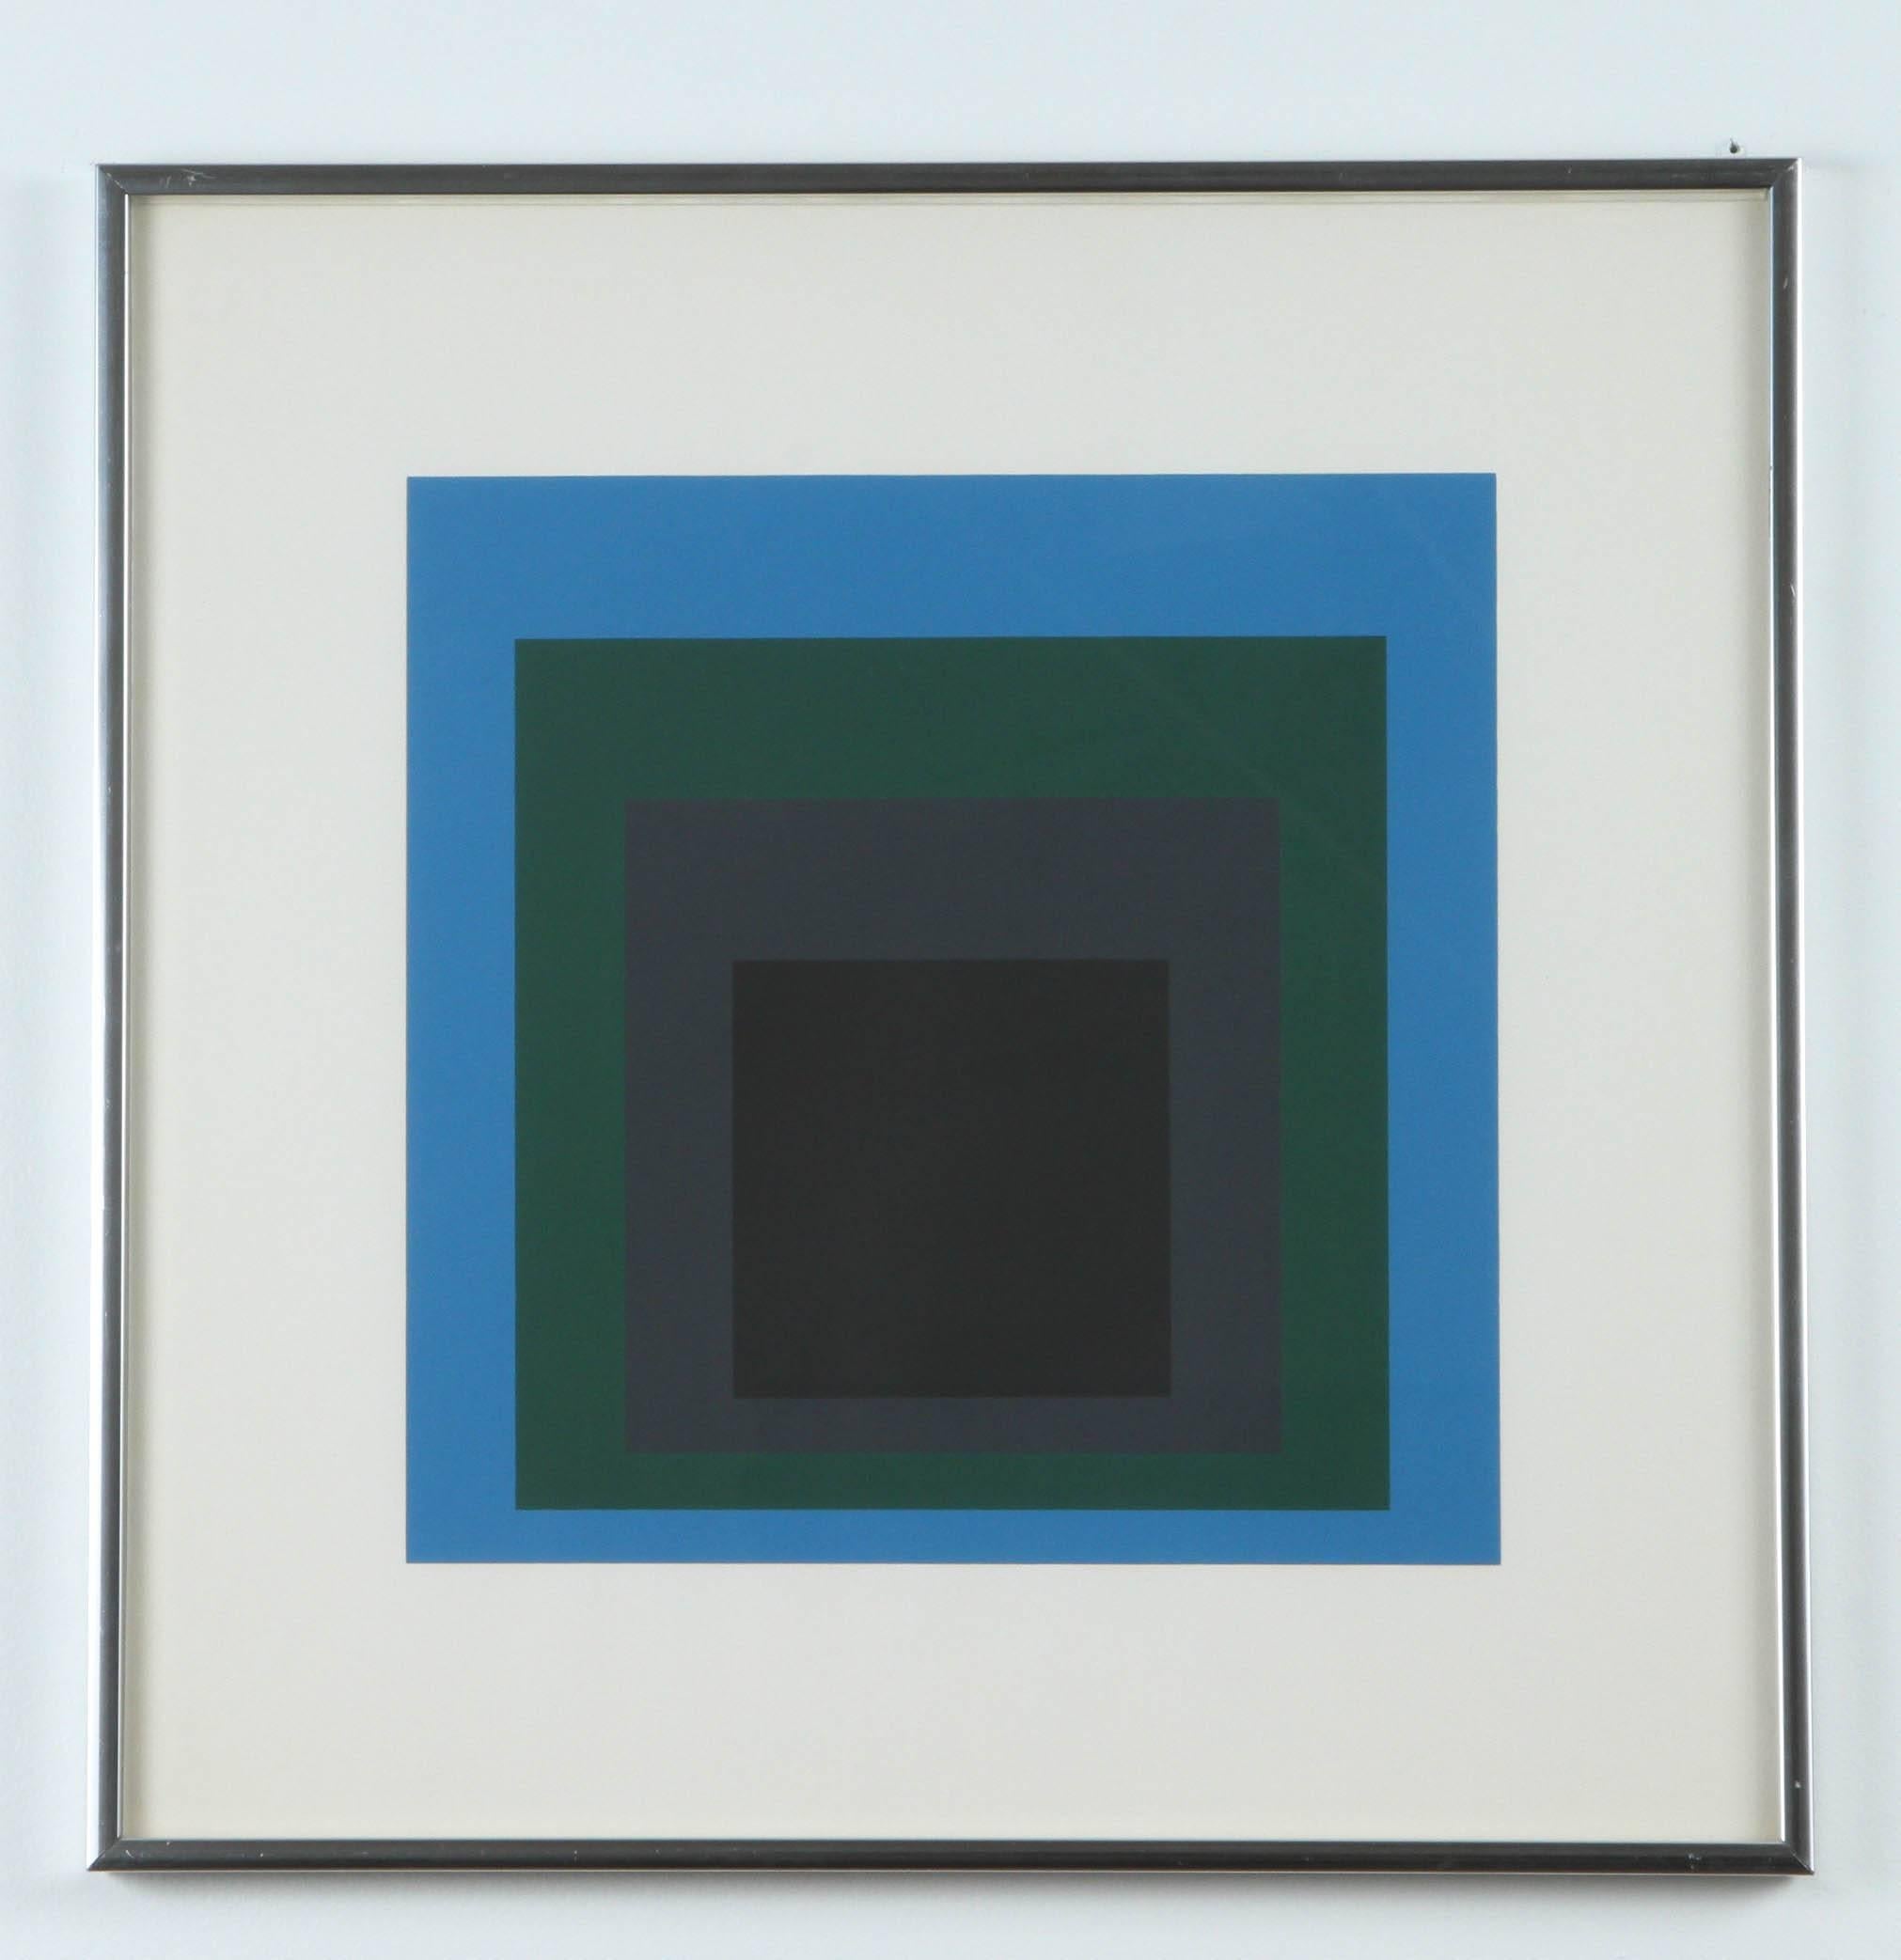 Josef Albers prints.

From the portfolio Homage To The Square, New Haven, Ives-Sillman, Inc., 1962.

